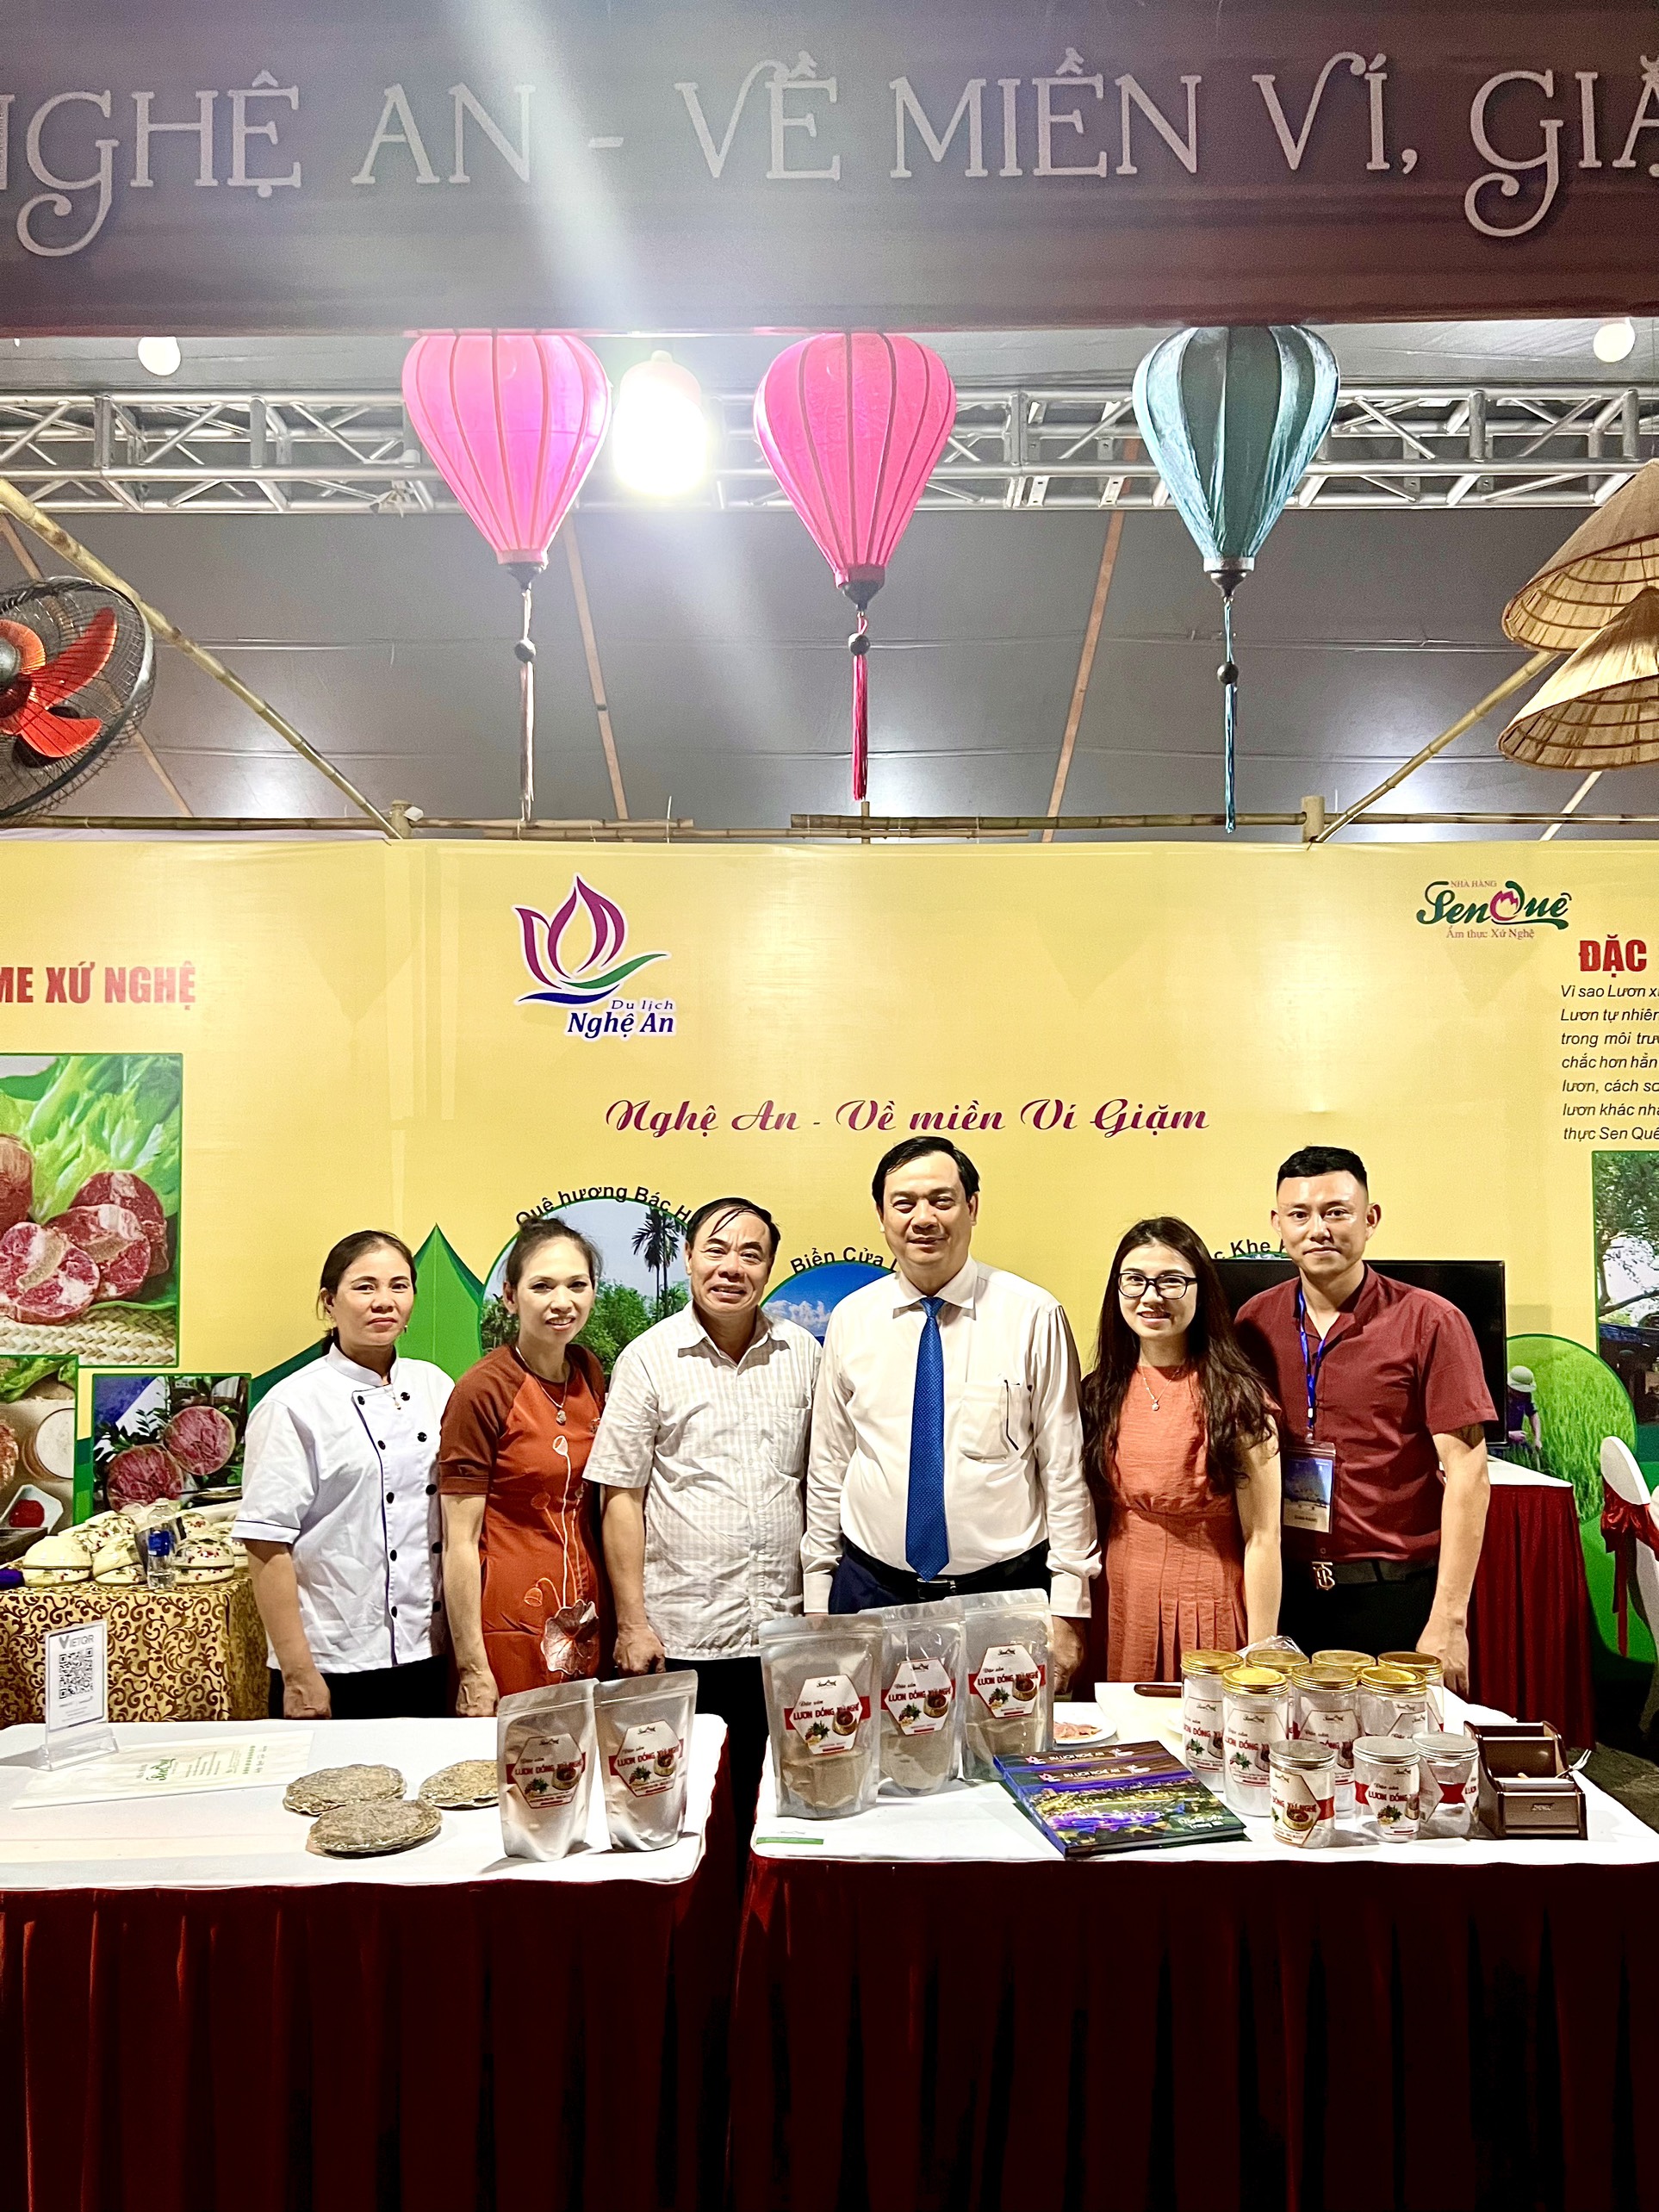 232 / 5.000 Kết quả dịch Kết quả bản dịch Nghe An participates in the Vietnam Culture and Cuisine Festival 2023 in Quang Tri with the theme "National Soul - Taste of the Motherland" taking place from April 28 to 30, 2023 at Cua Viet Tourist Service Area Square. Cua Viet town, Gio Linh district, Quang Tri province.